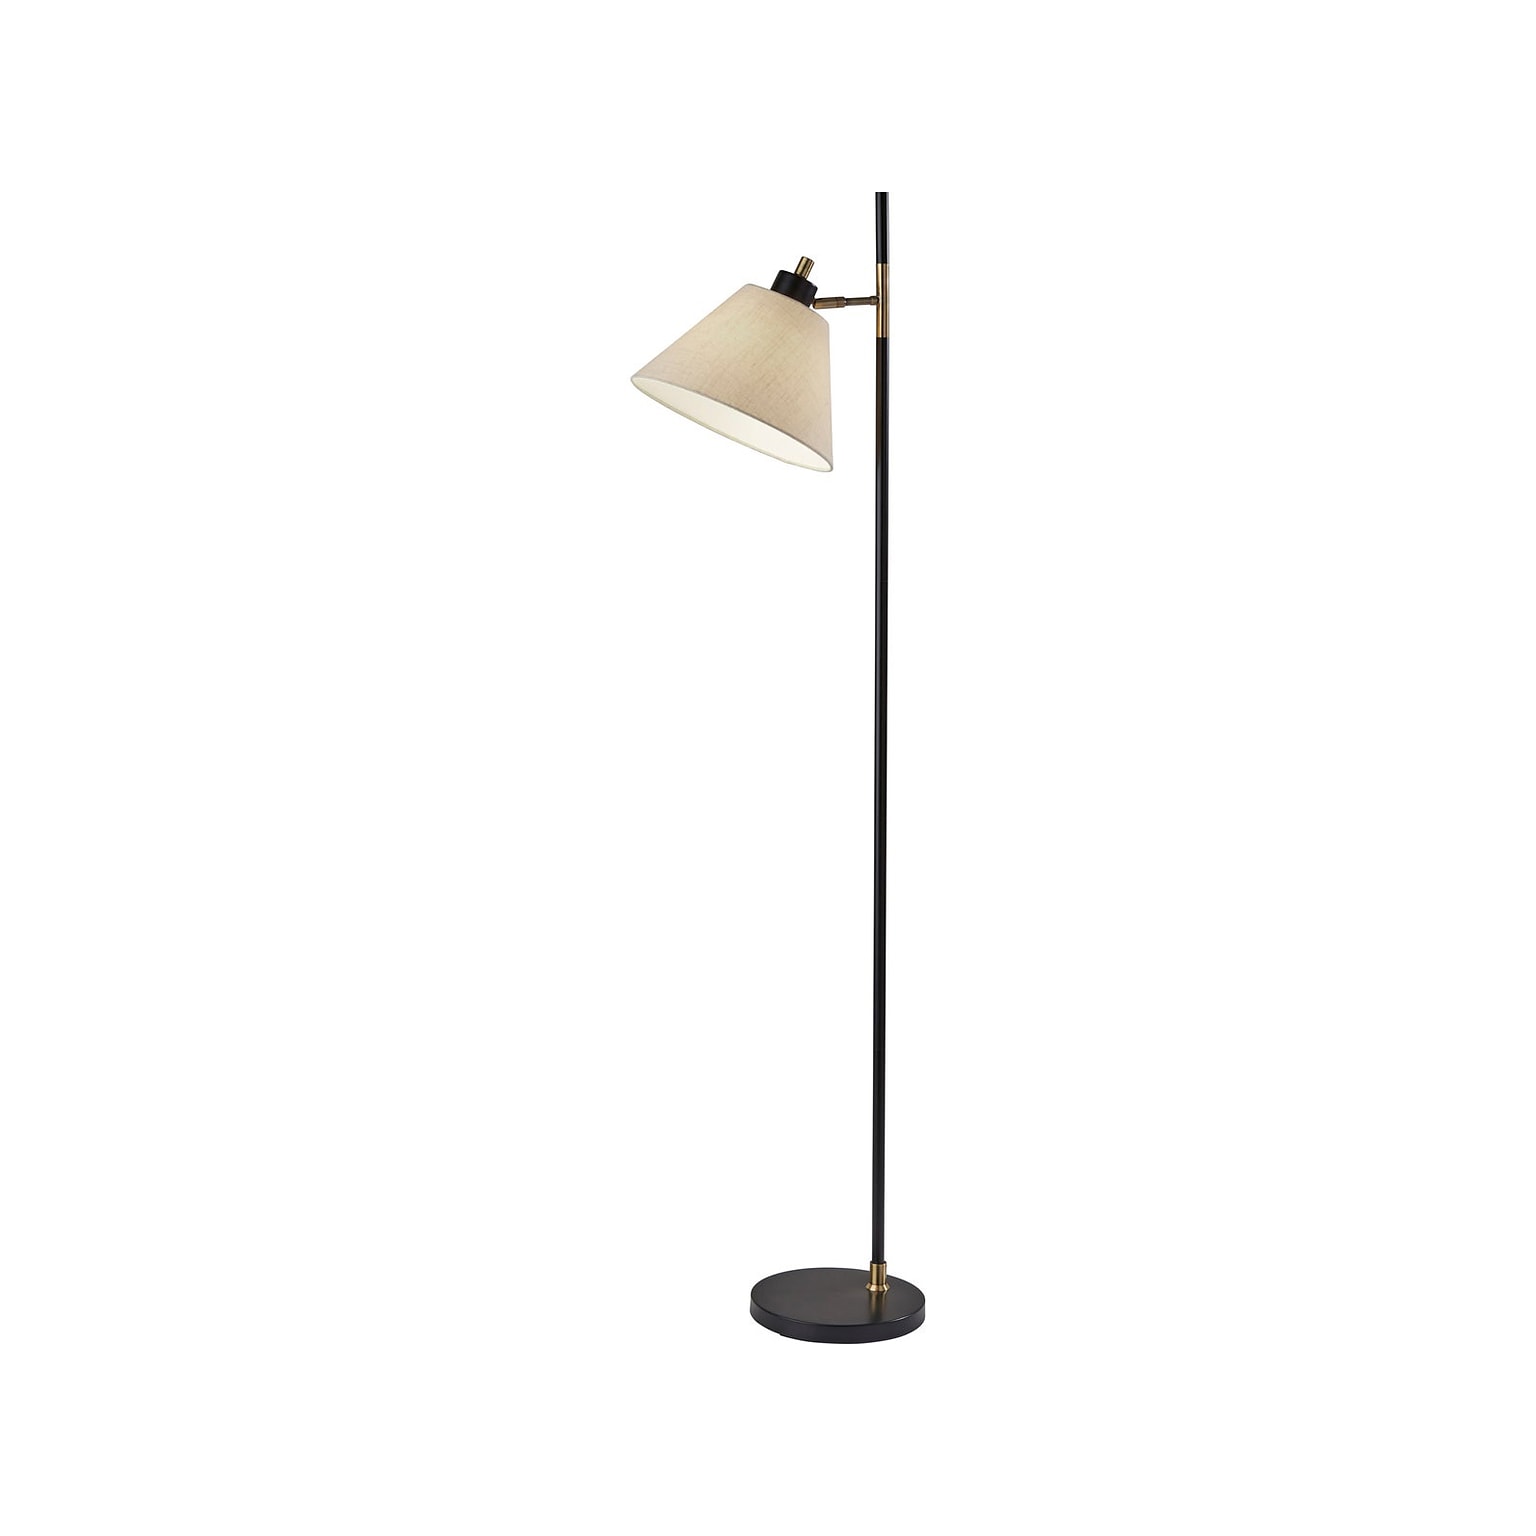 Adesso Matthew 63.5 Antique Brass Floor Lamp with Trapezoid Shade (1610-01)